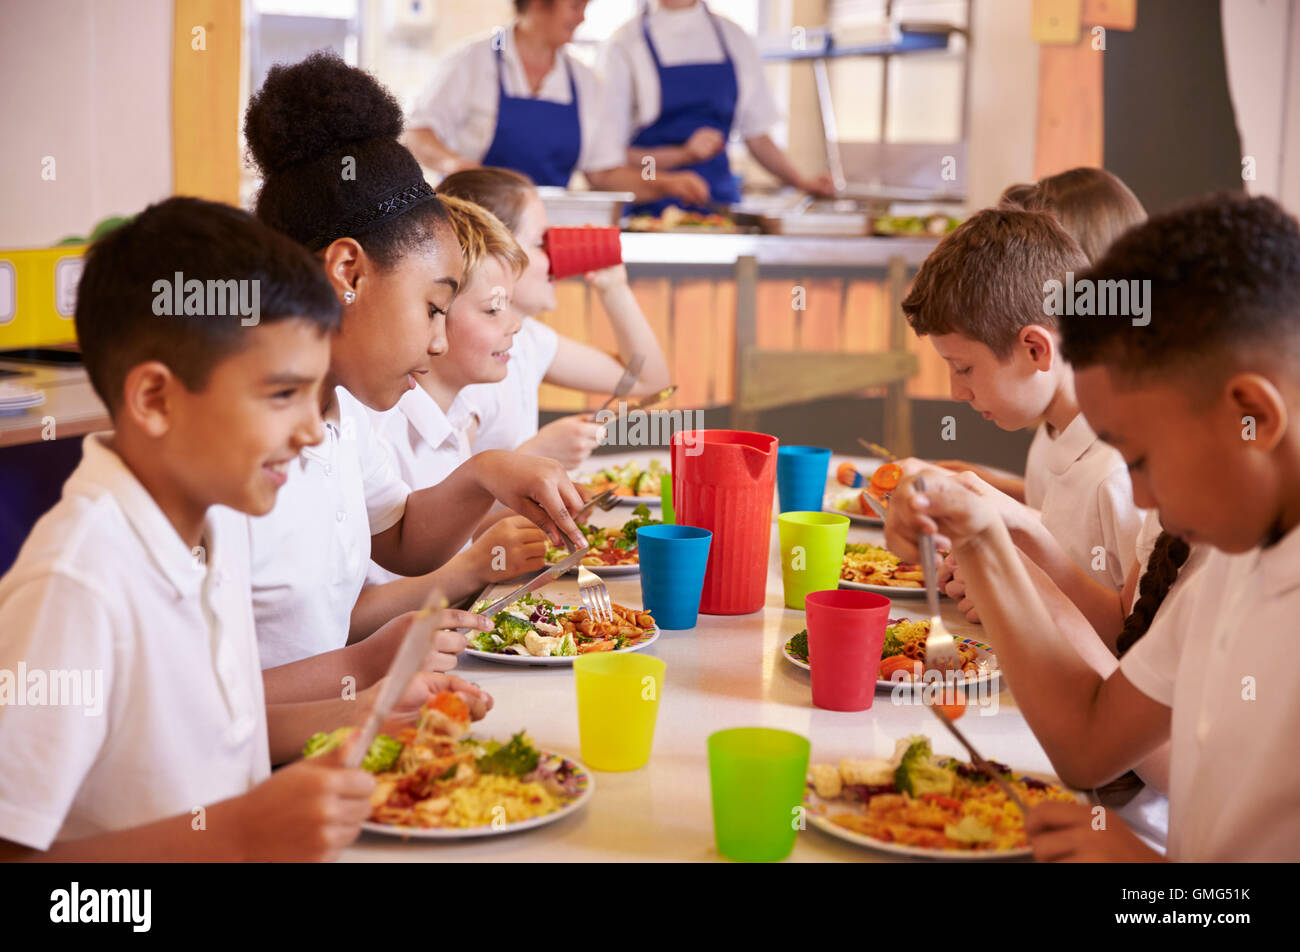 https://c8.alamy.com/comp/GMG51K/primary-school-kids-eating-at-a-table-in-school-cafeteria-GMG51K.jpg